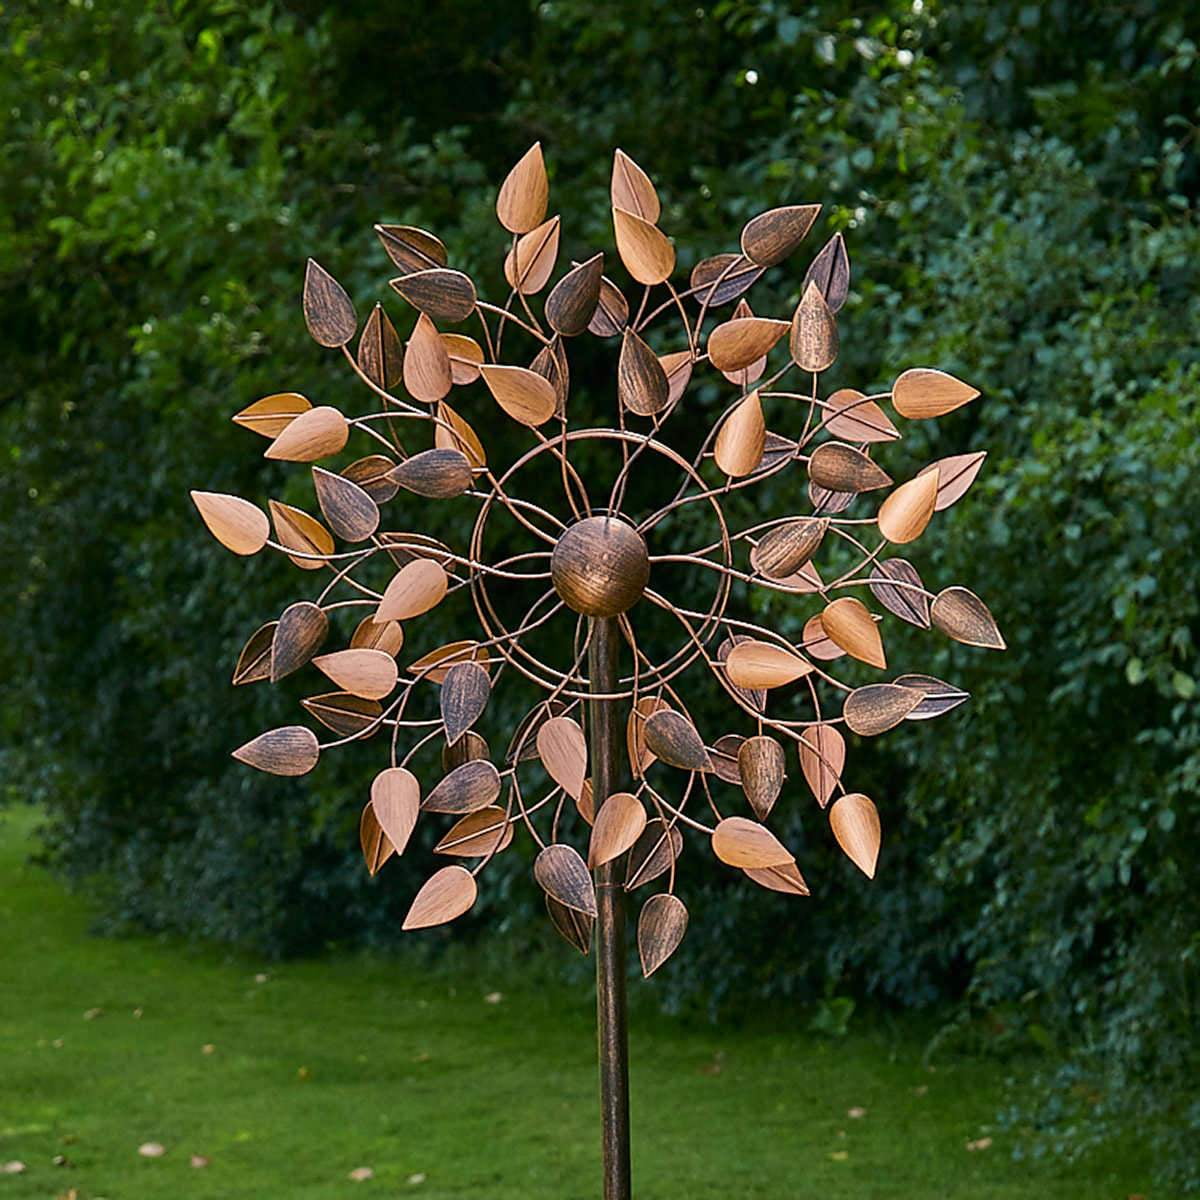 BRAND NEW 54" LONG HANGING WIND SPINNER YARD DECORATION 